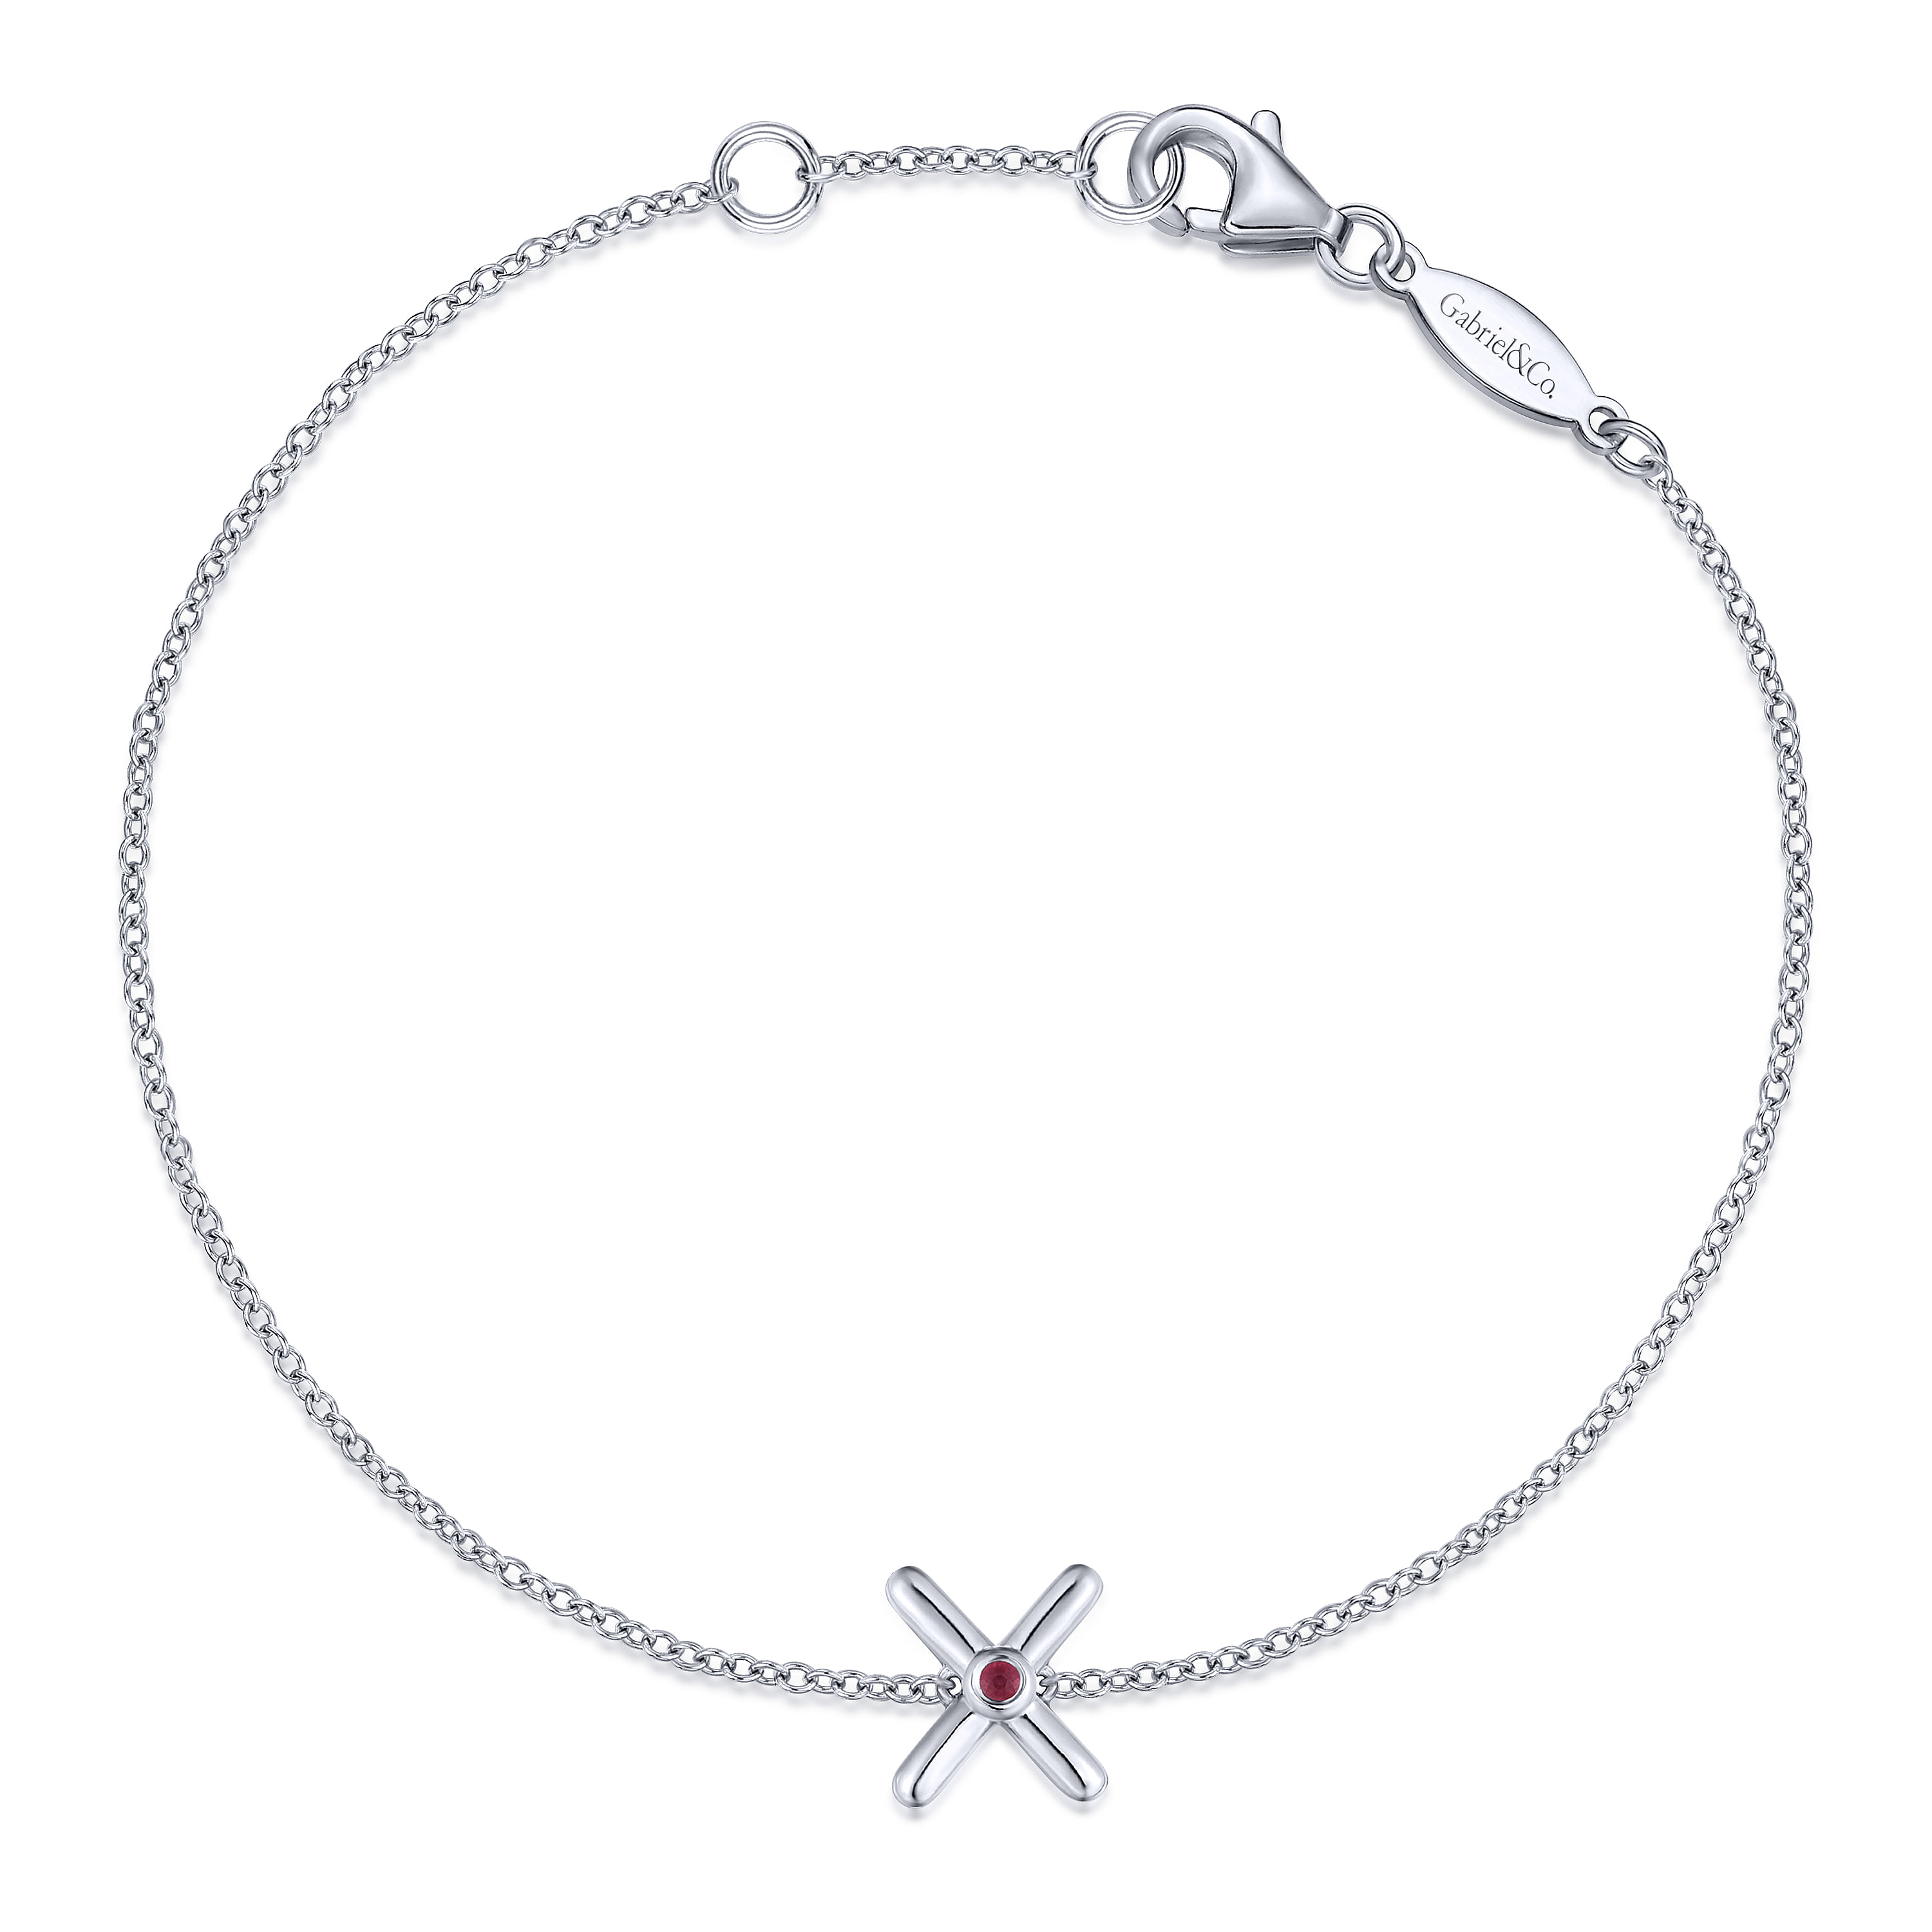 Gabriel - 925 Sterling Silver Chain Bracelet with Ruby X Charm